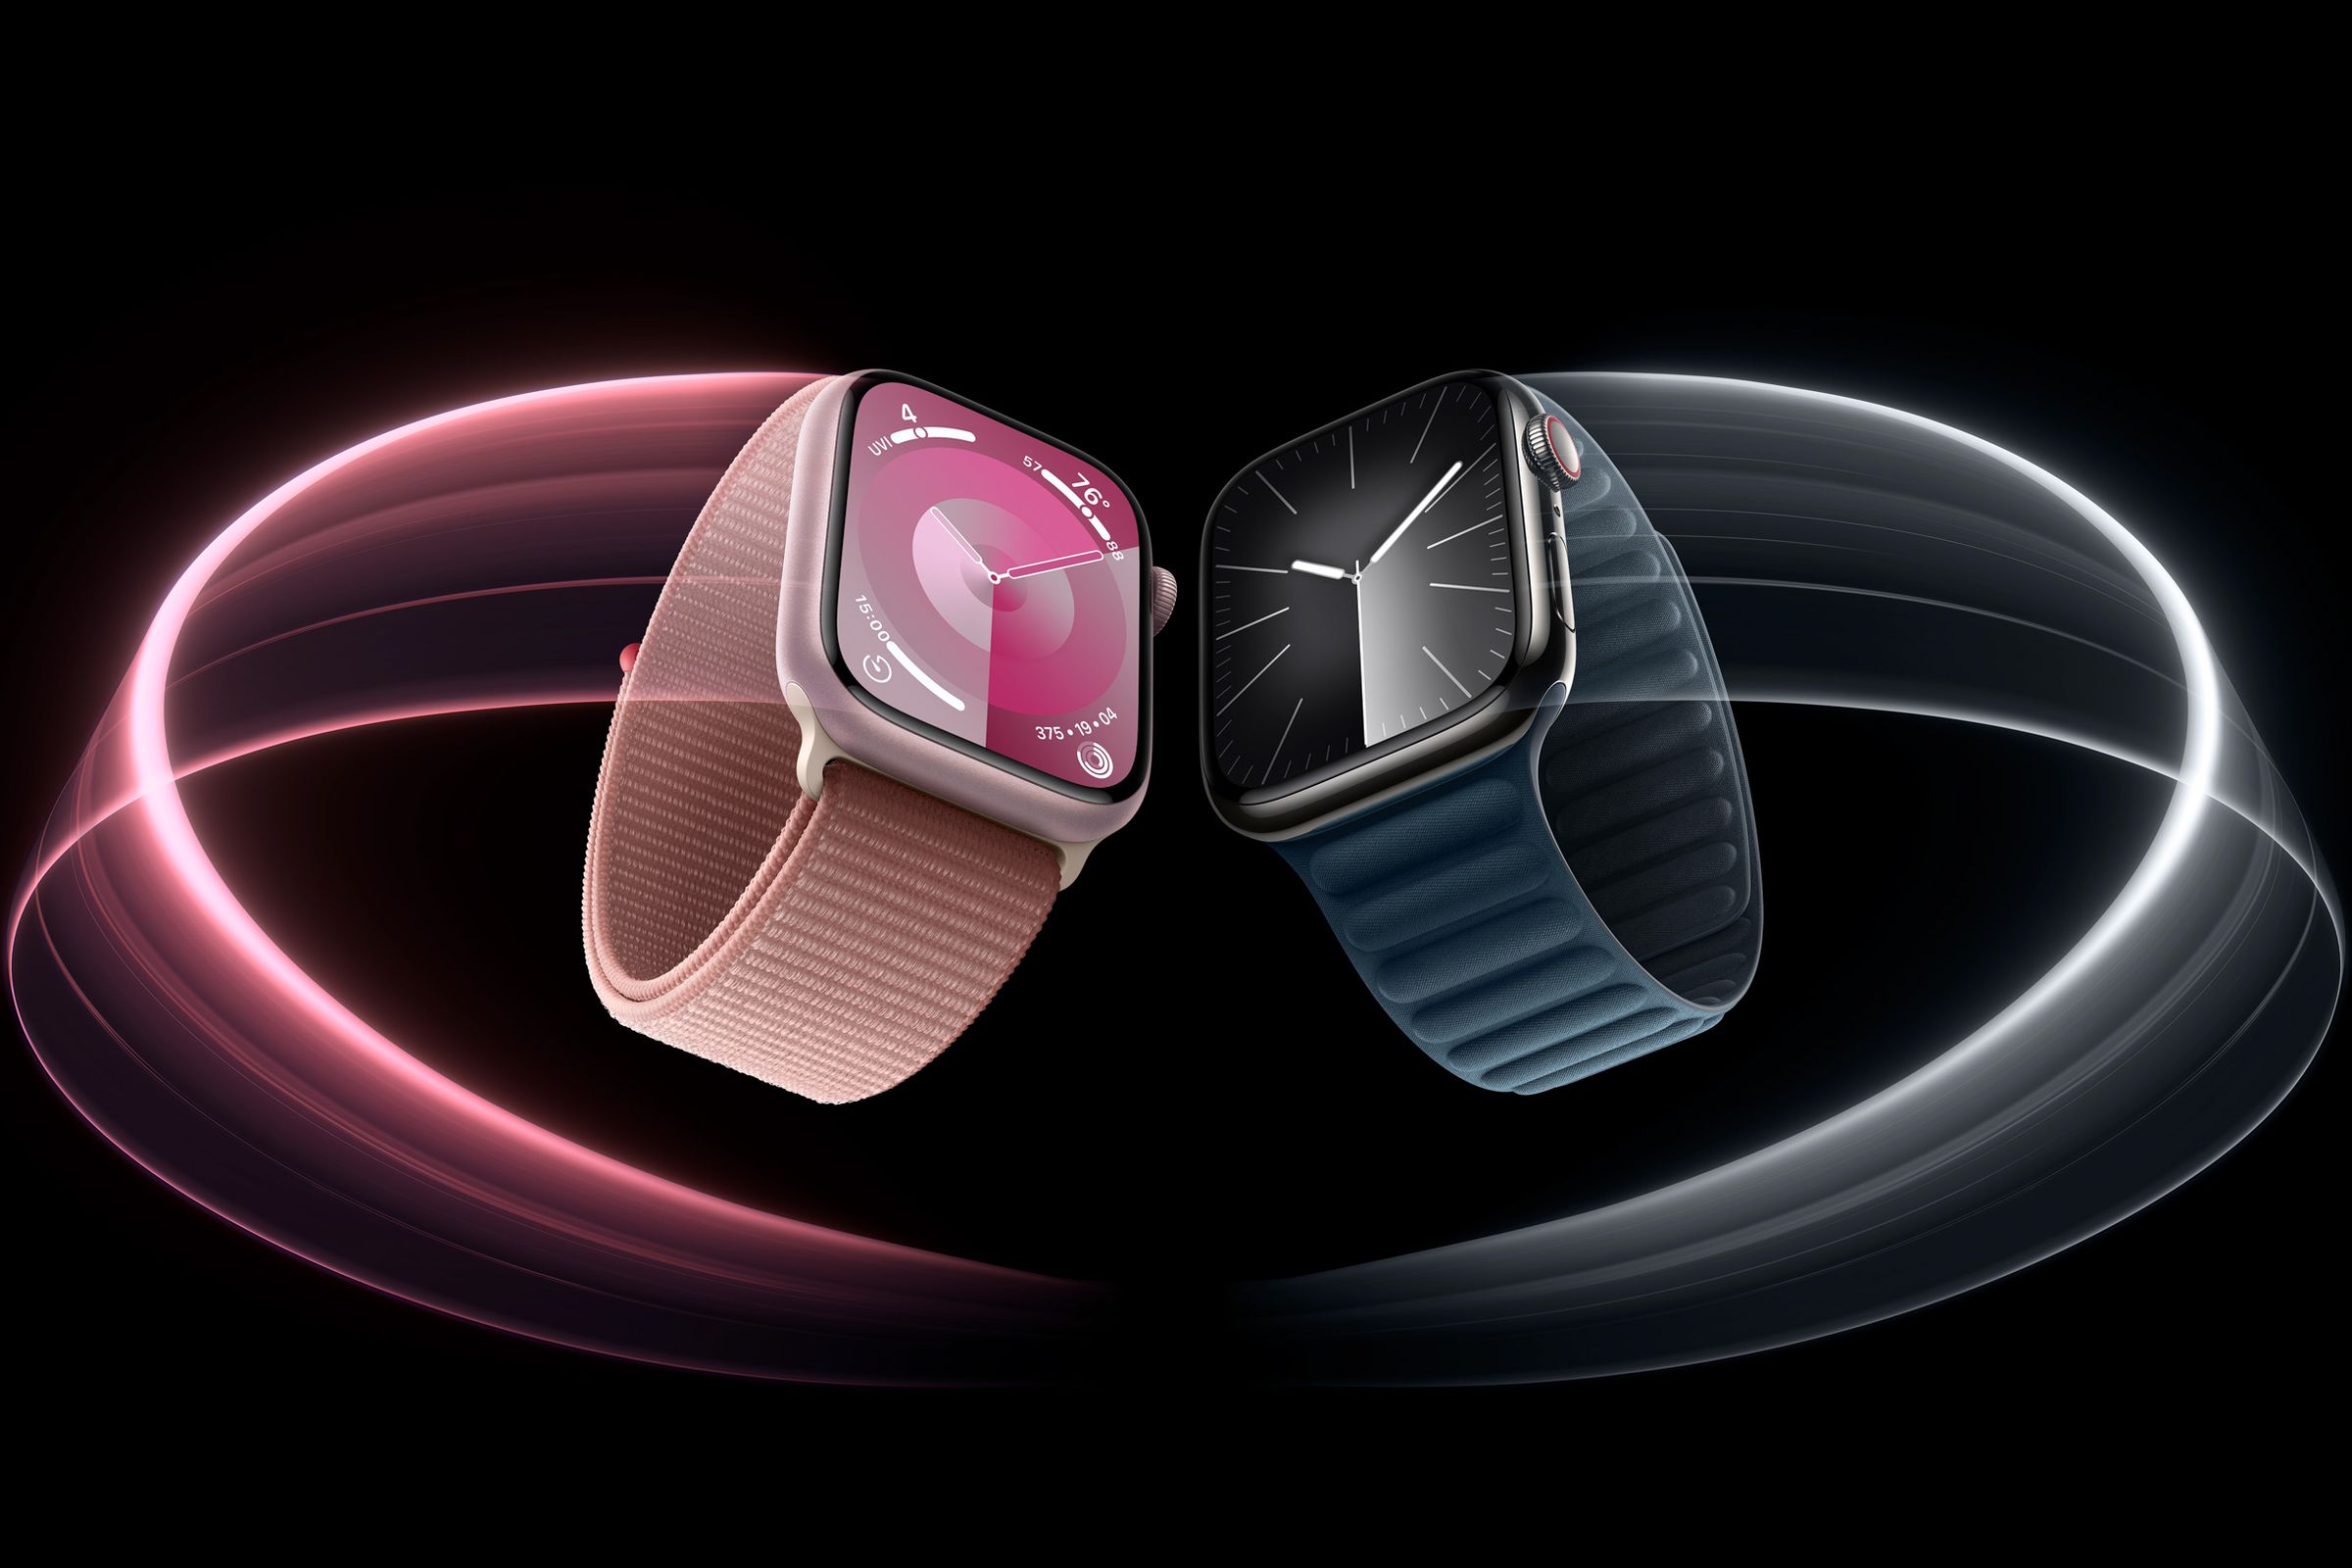 Art depicting two Apple watches.